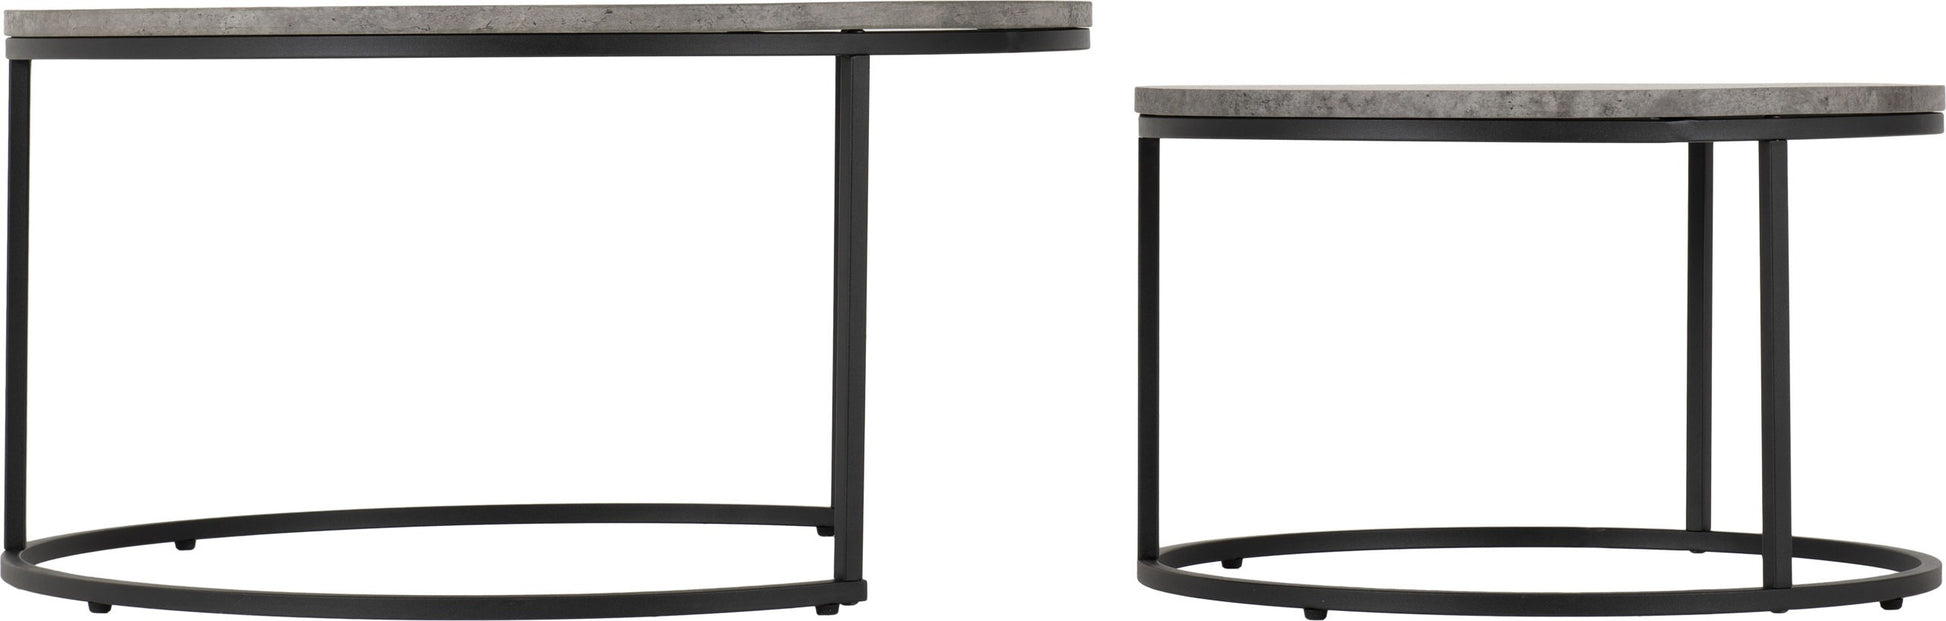 ATHENS-ROUND-COFFEE-TABLE-SET-CONCRETE-EFFECT-2022-300-301-054-03-scaled.jpgAthens Round Coffee Table Set- Concrete Effect/Black- The Right Buy Store